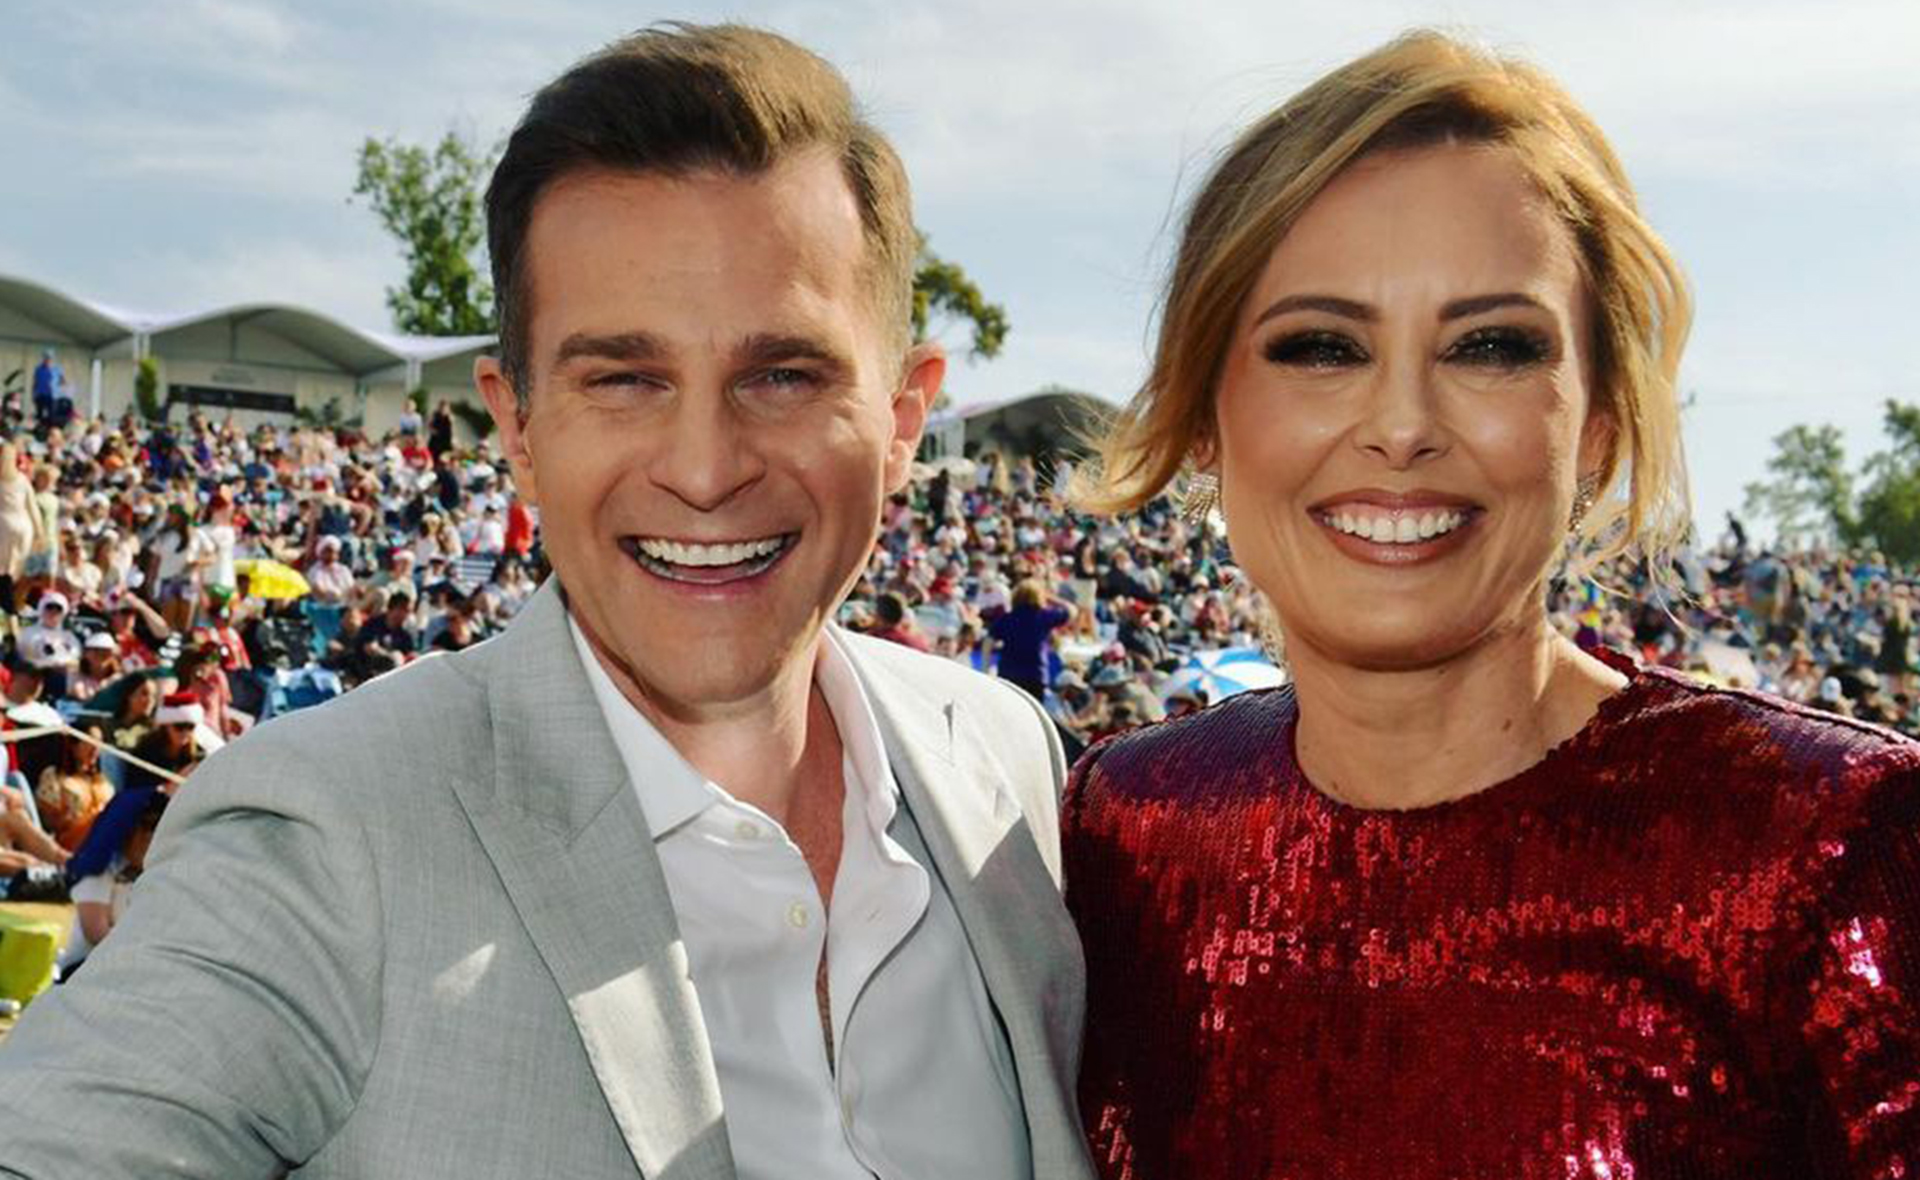 EXCLUSIVE: Why Allison Langdon wouldn’t let Karl Stefanovic co-host Carols by Candlelight with her